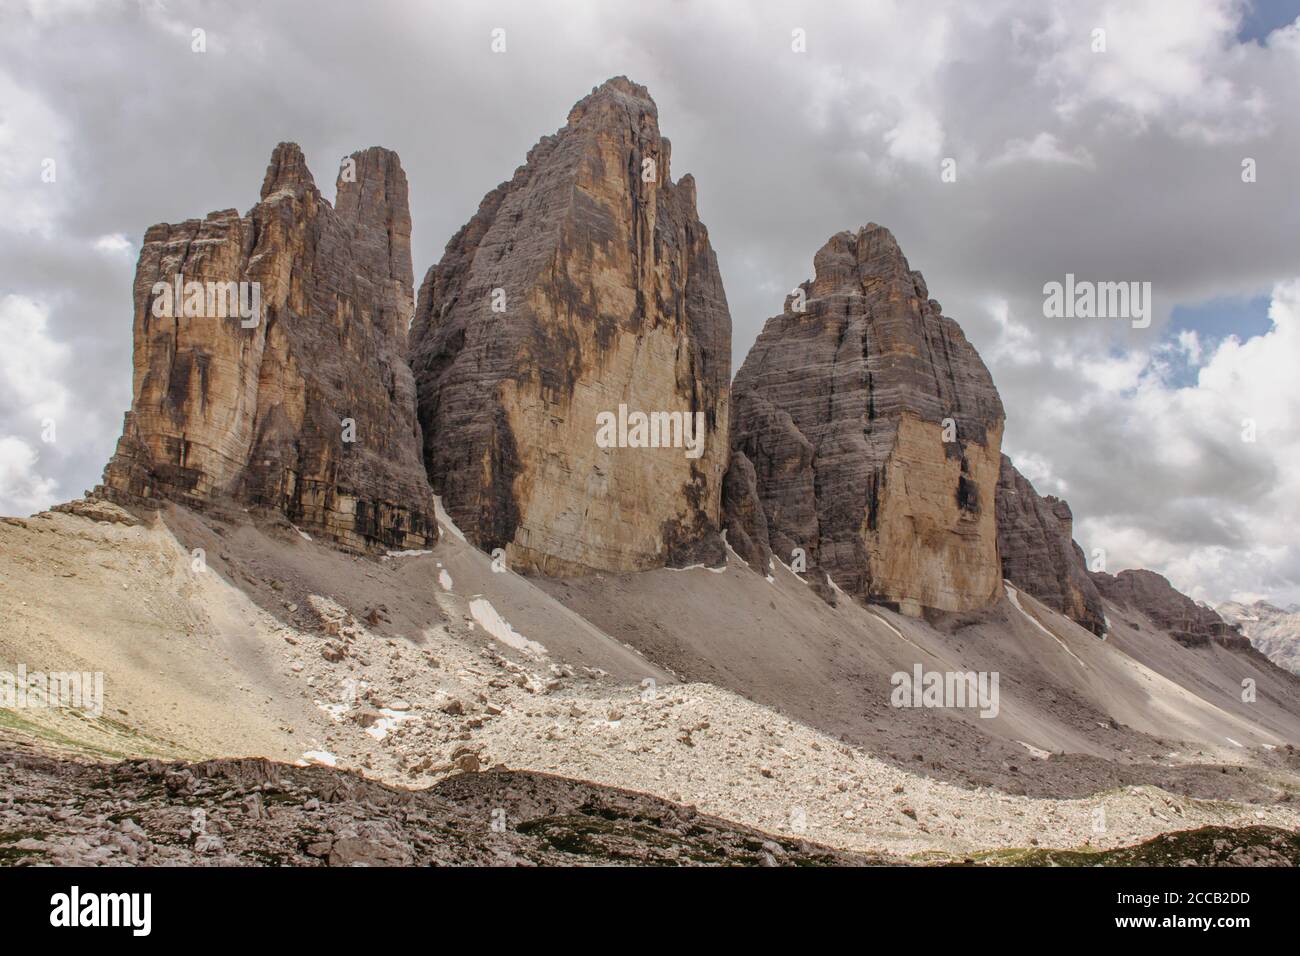 Hiking around three peaks of Tre Cime di Lavaredo (Drei Zinnen), Dolomites, Italy. One of the best-known mountain groups in the Alps. Active healthy l Stock Photo